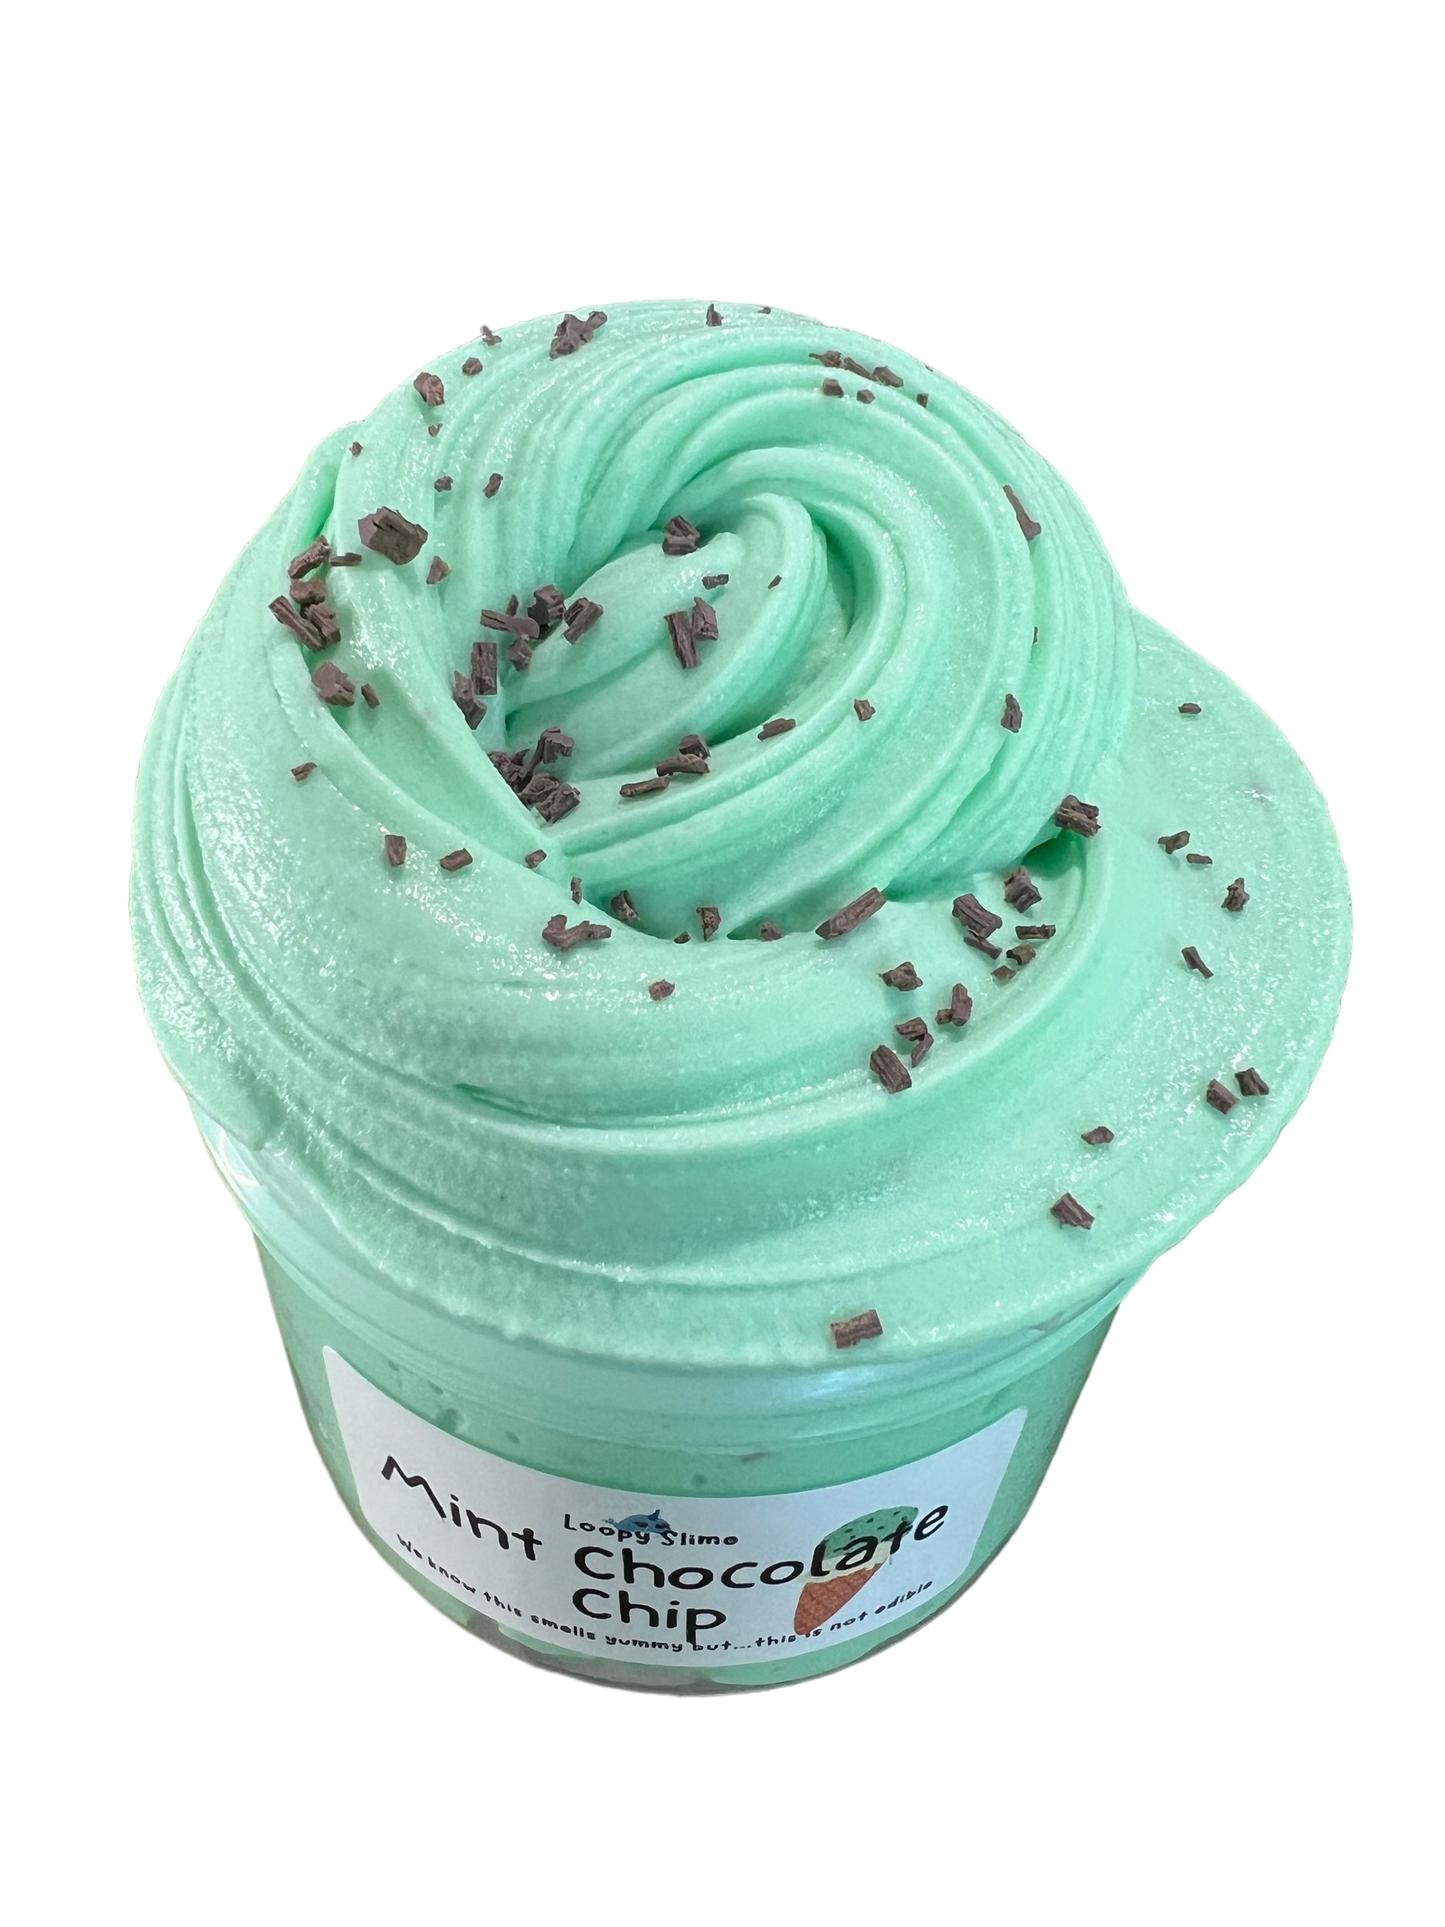 Mint chocolate chip slime